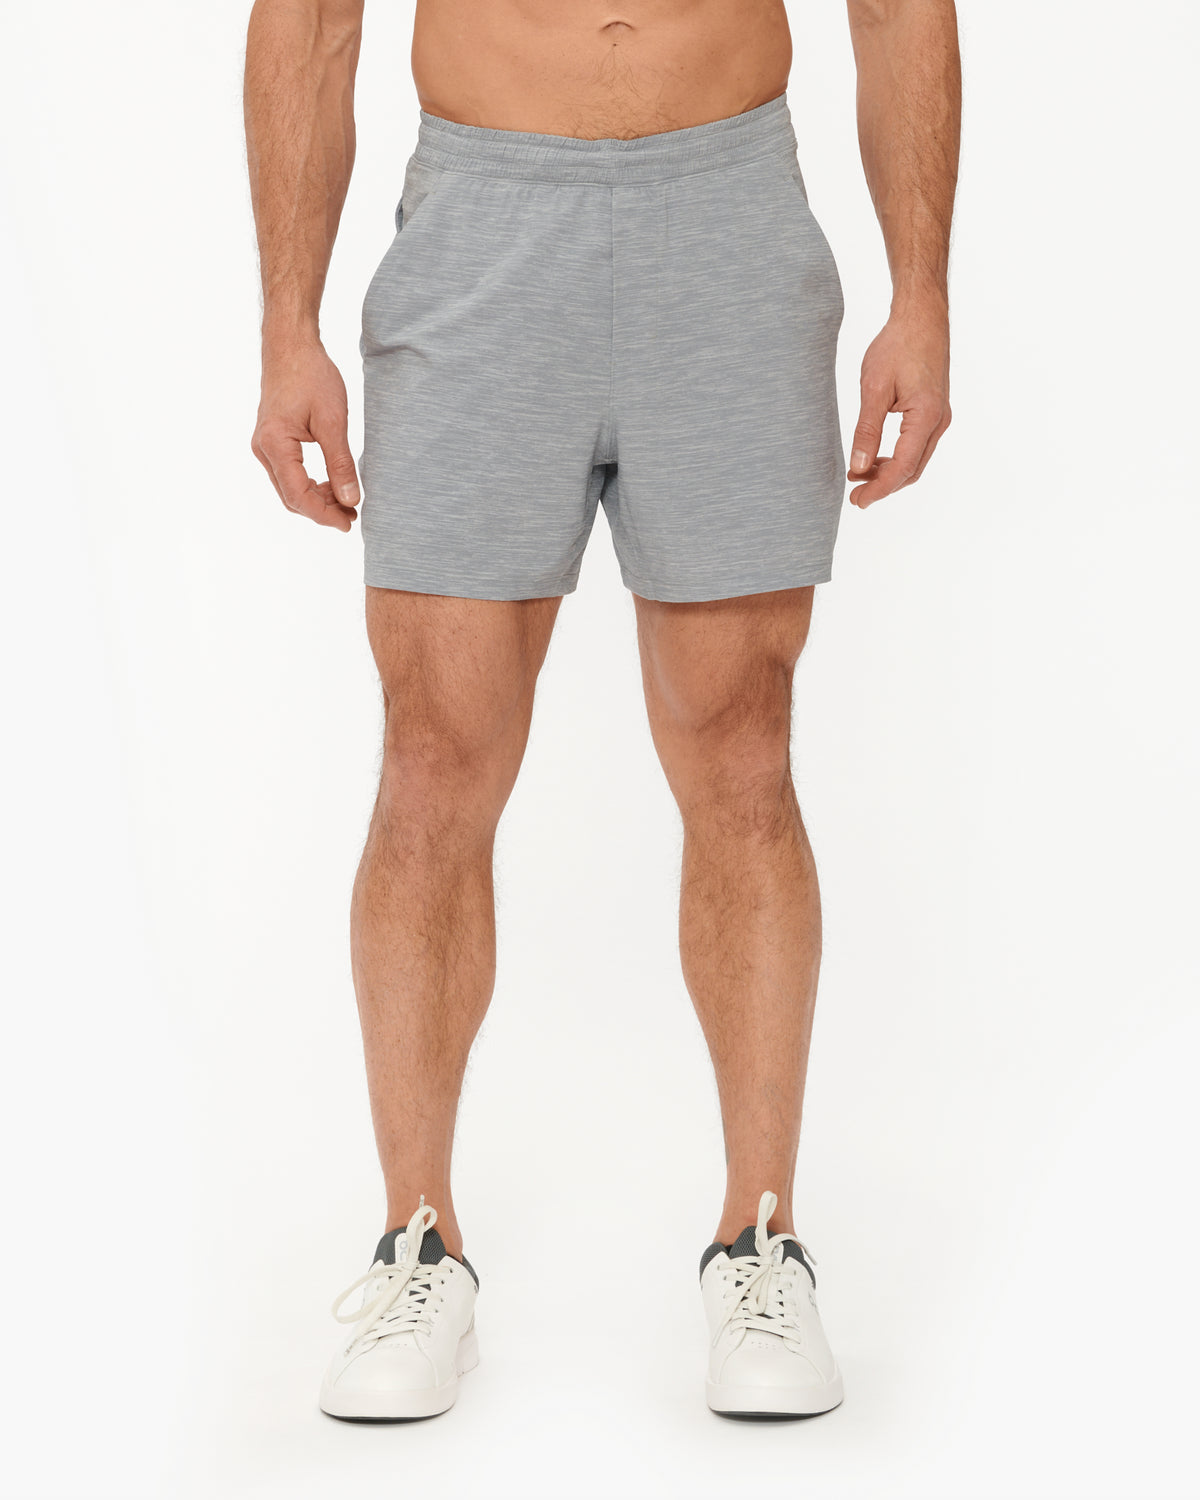 Lululemon Pace Breaker Short 7 - Lined – The Shop at Equinox